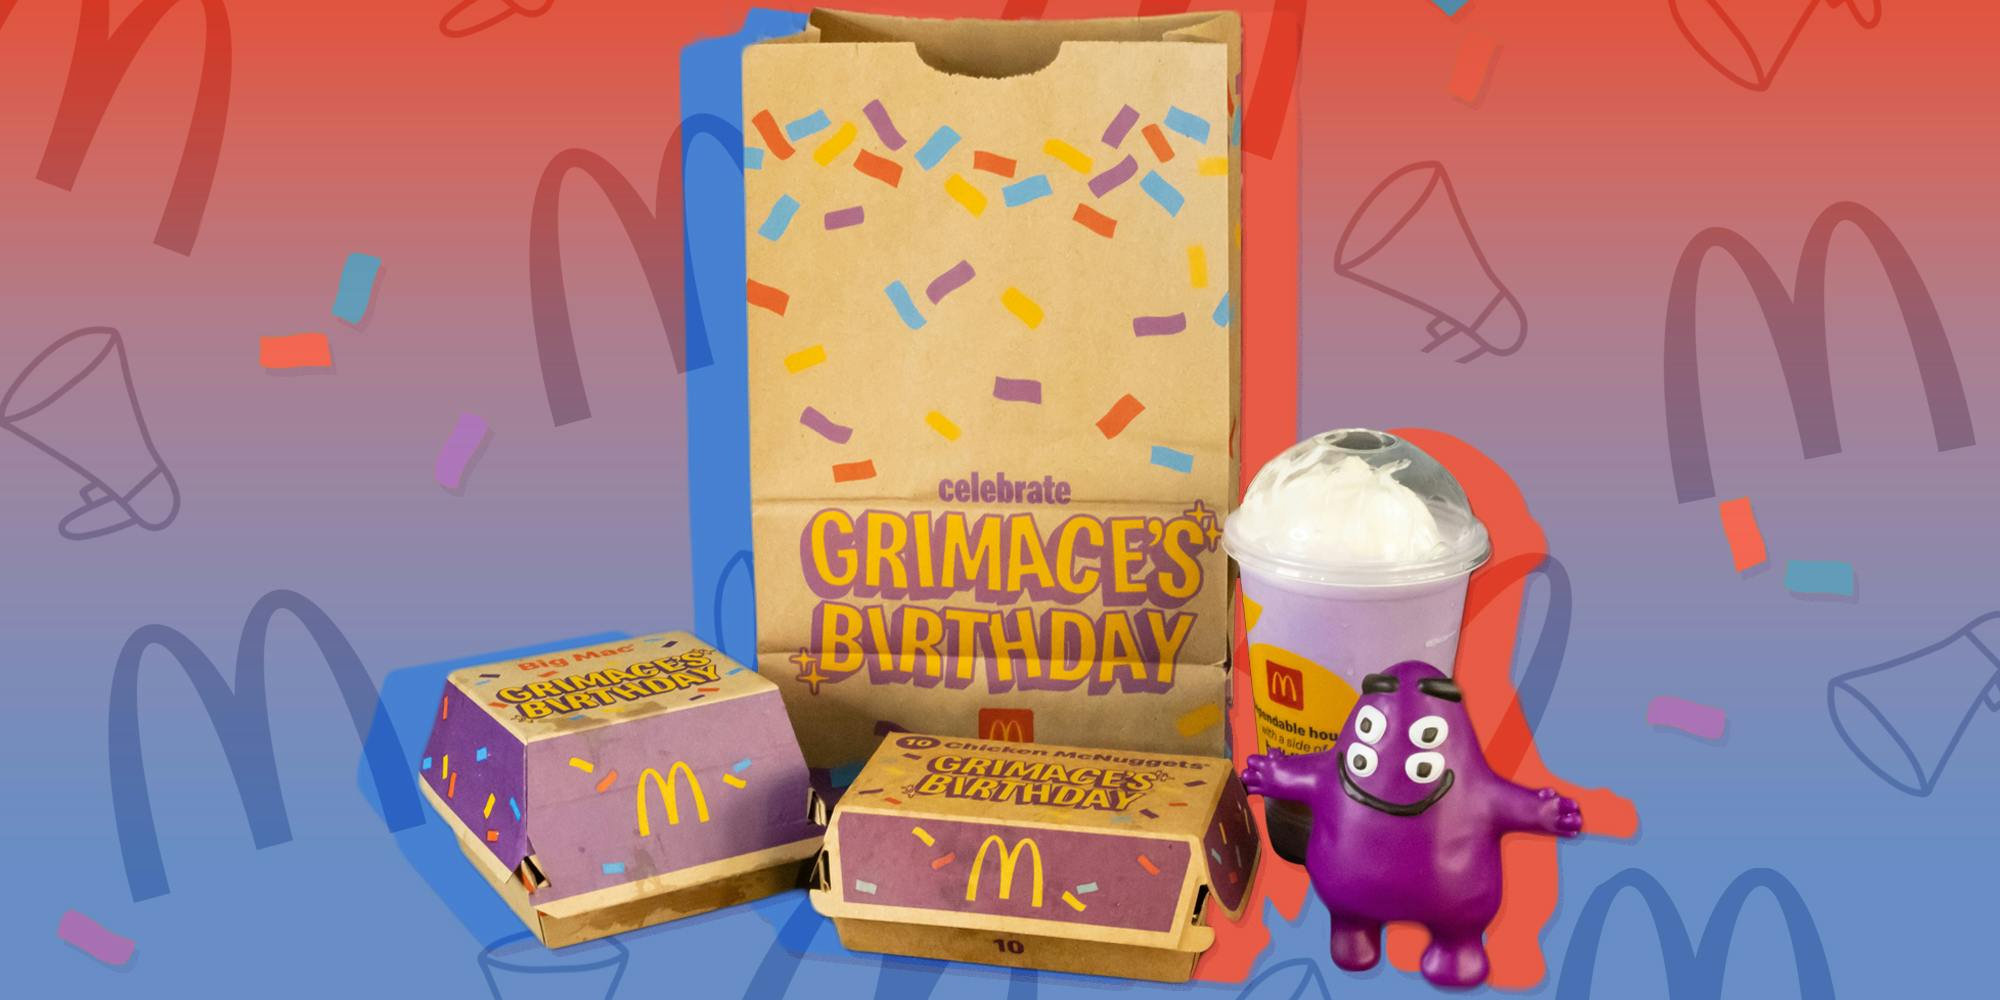 The Grimace Shake: How McDonald’s Turned Us All Into Brand Ambassadors